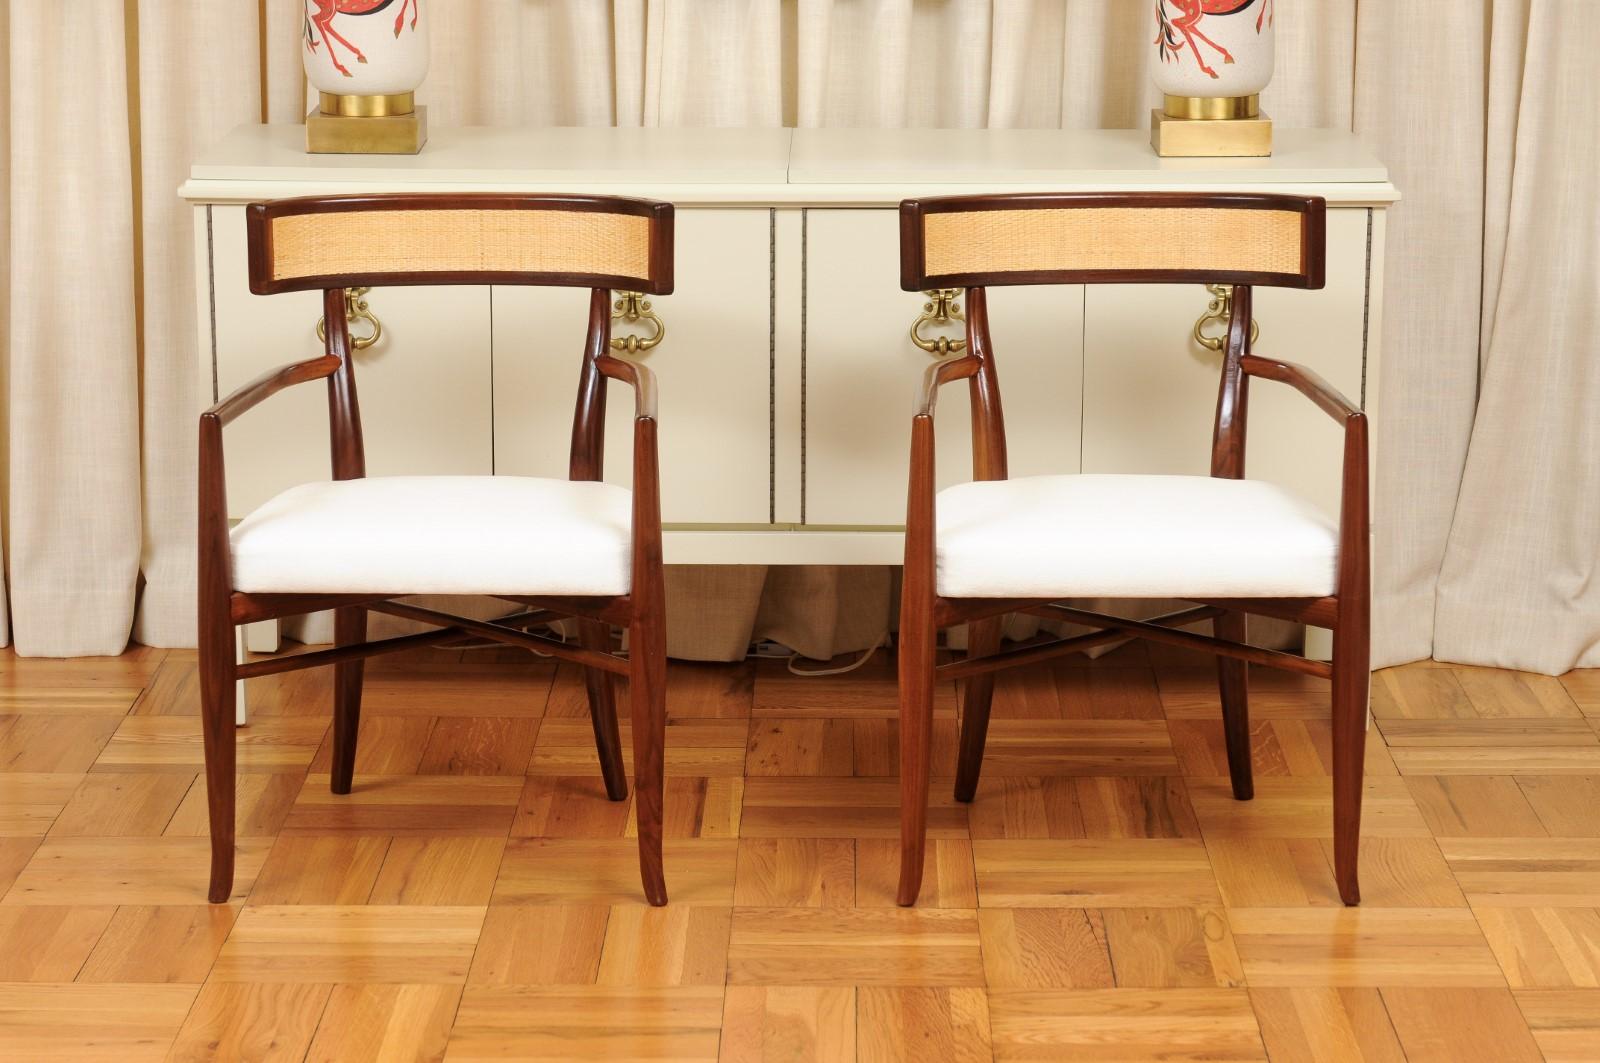 All Arms, Incredible Set of 14 Klismos Chairs by Gibbings for Widdicomb  In Excellent Condition For Sale In Atlanta, GA